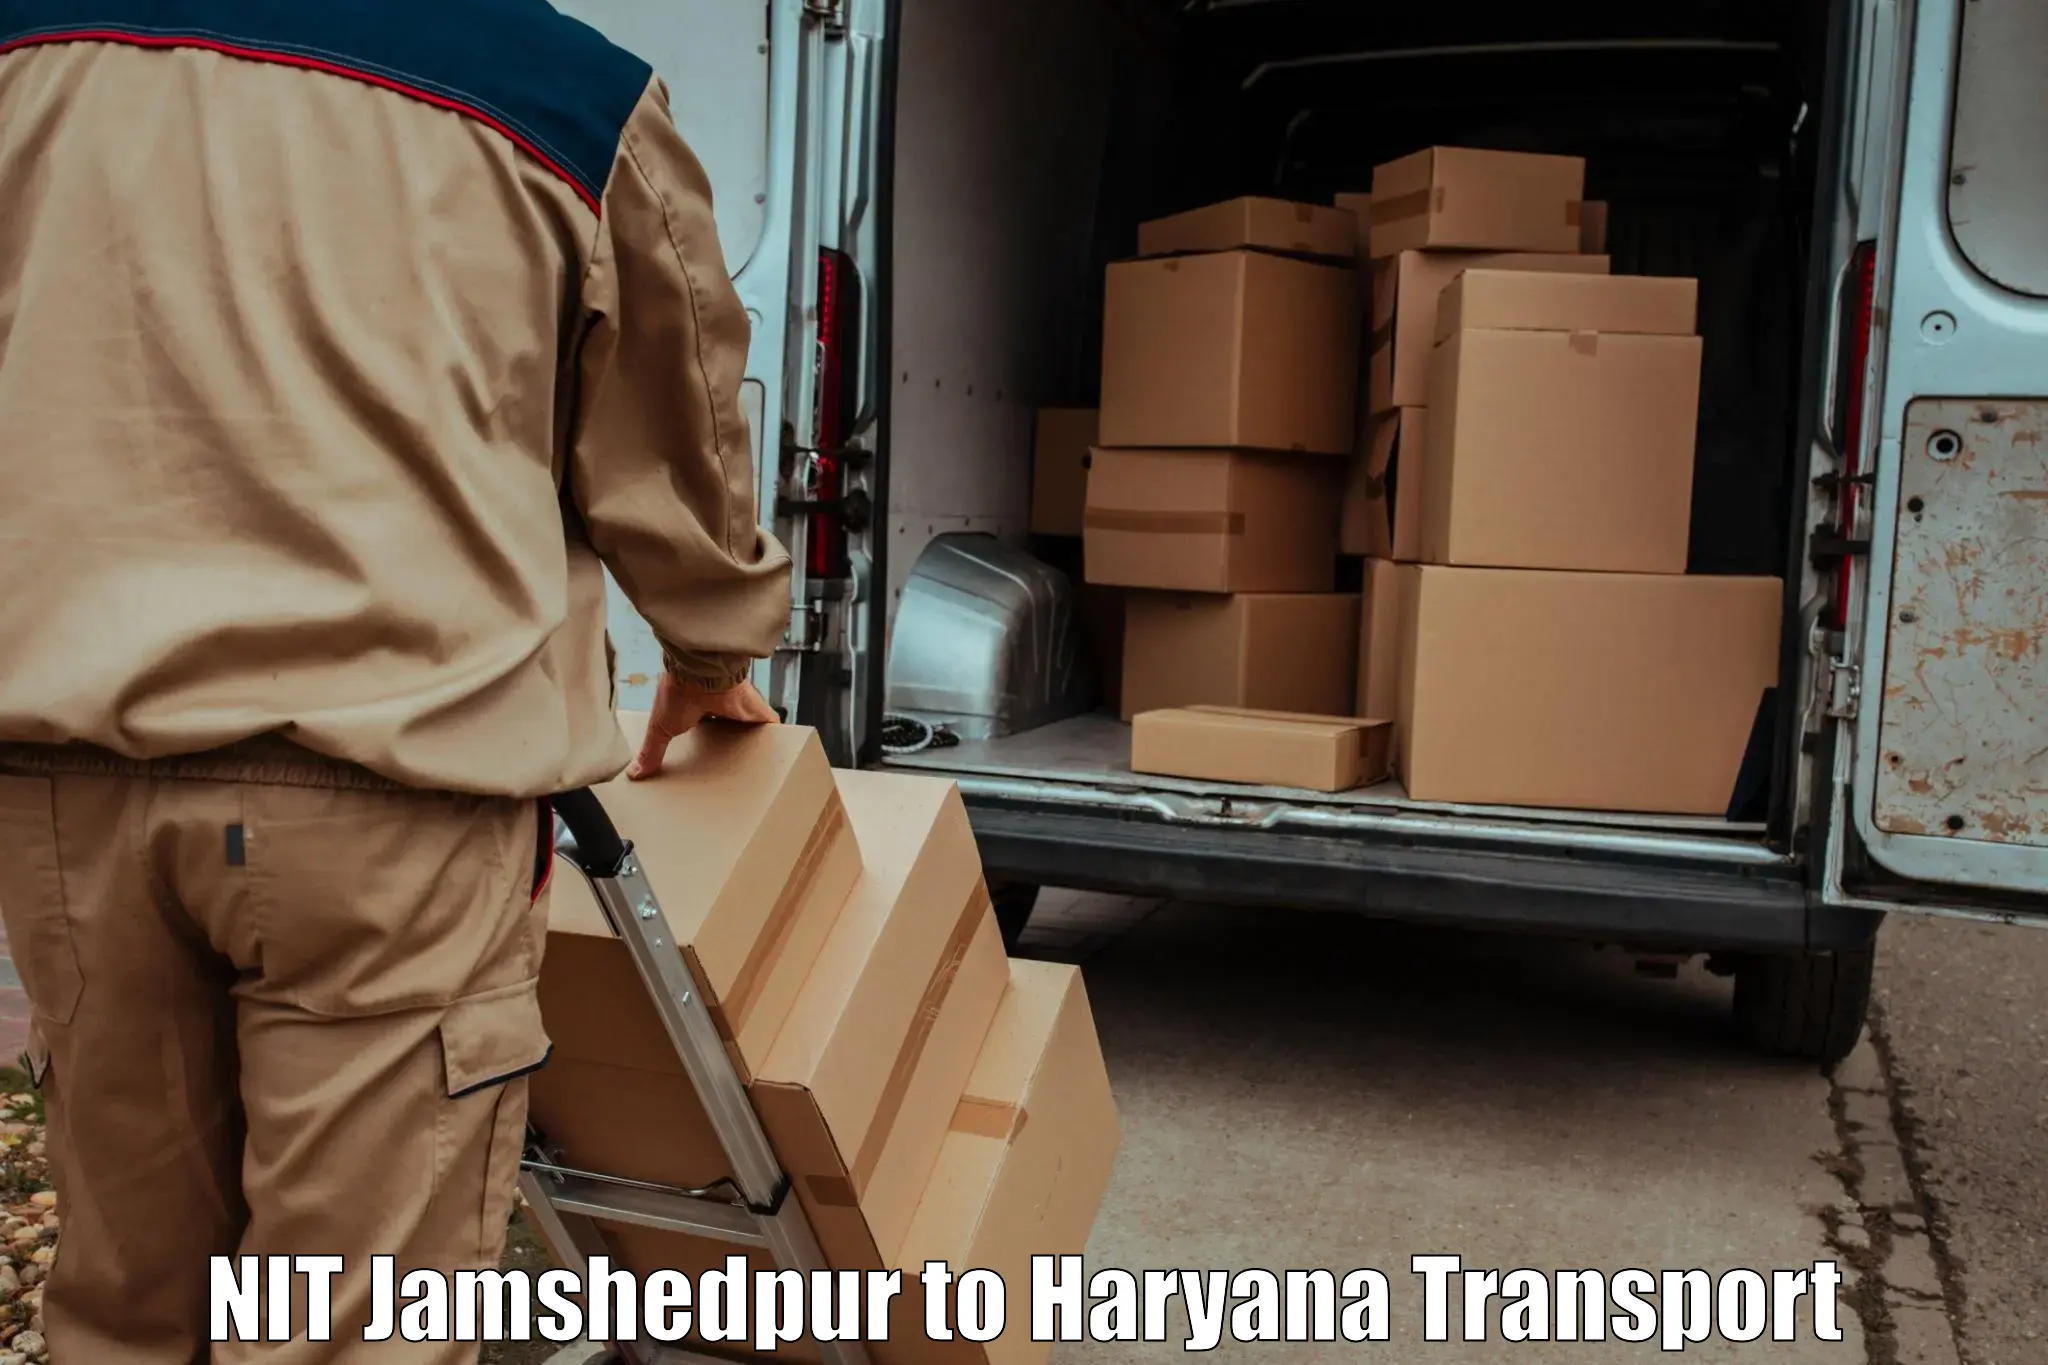 Container transport service NIT Jamshedpur to Rohtak